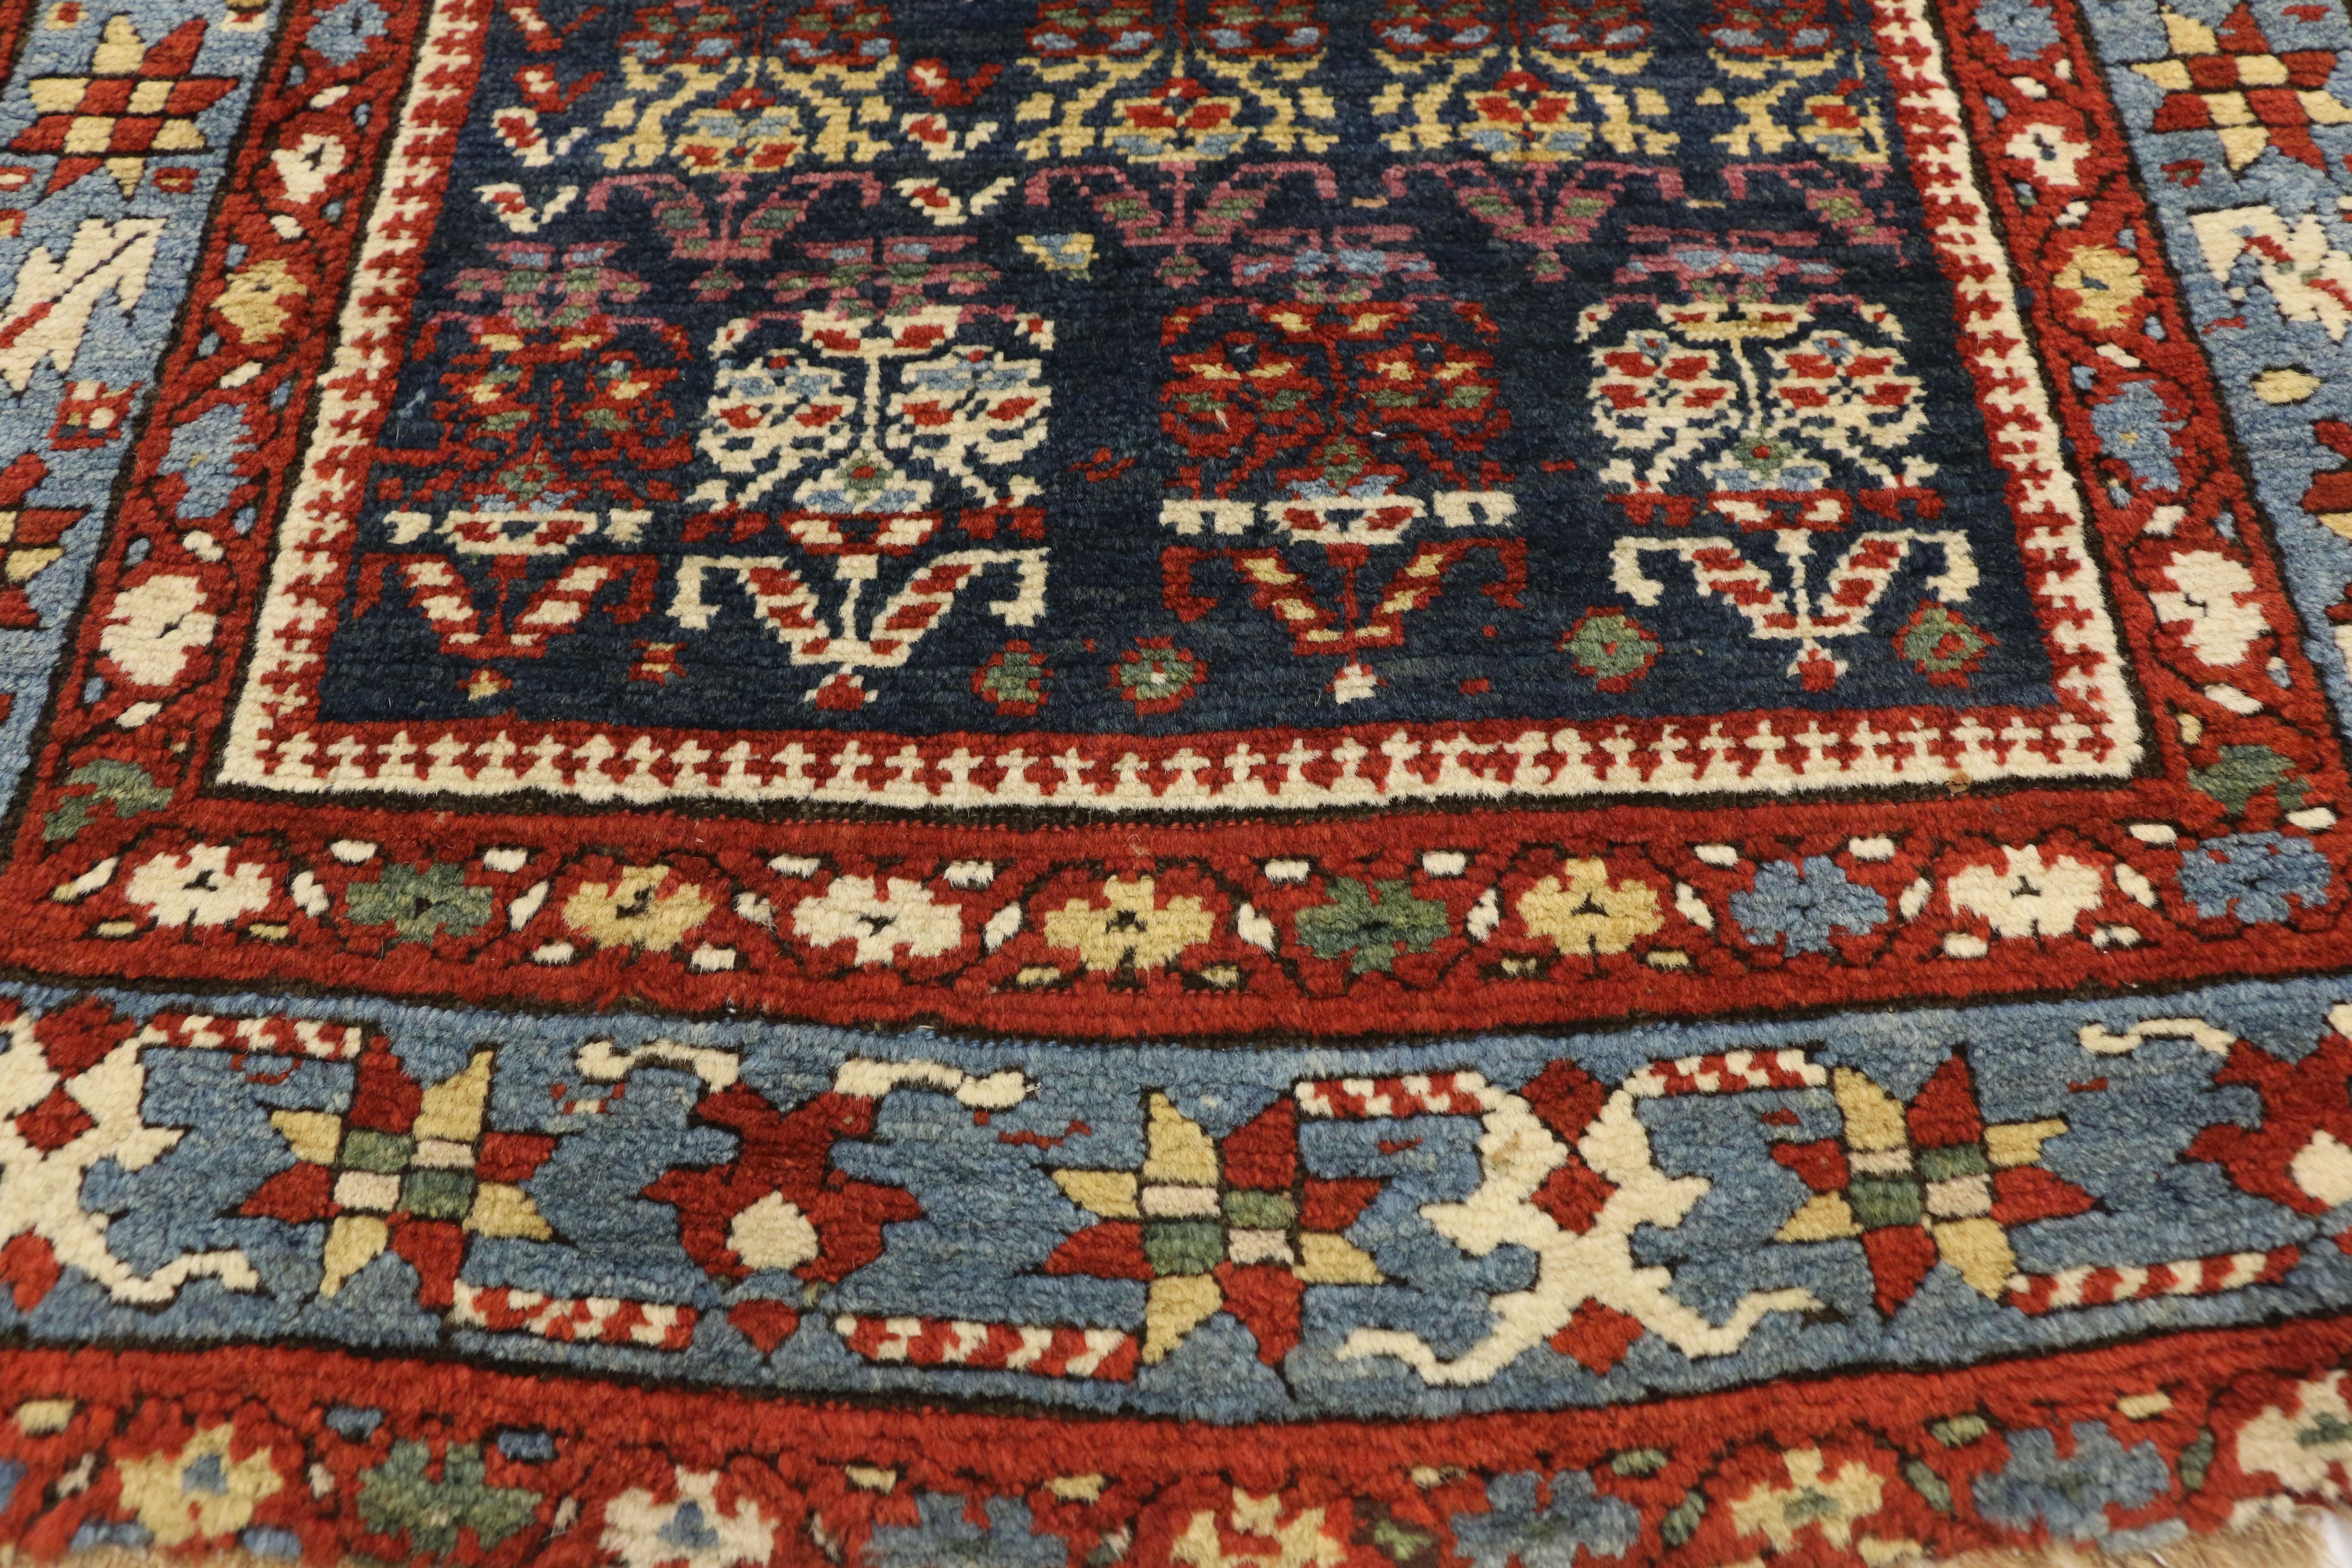 Antique Persian Malayer Hallway Runner with Modern Parisian Style In Good Condition For Sale In Dallas, TX